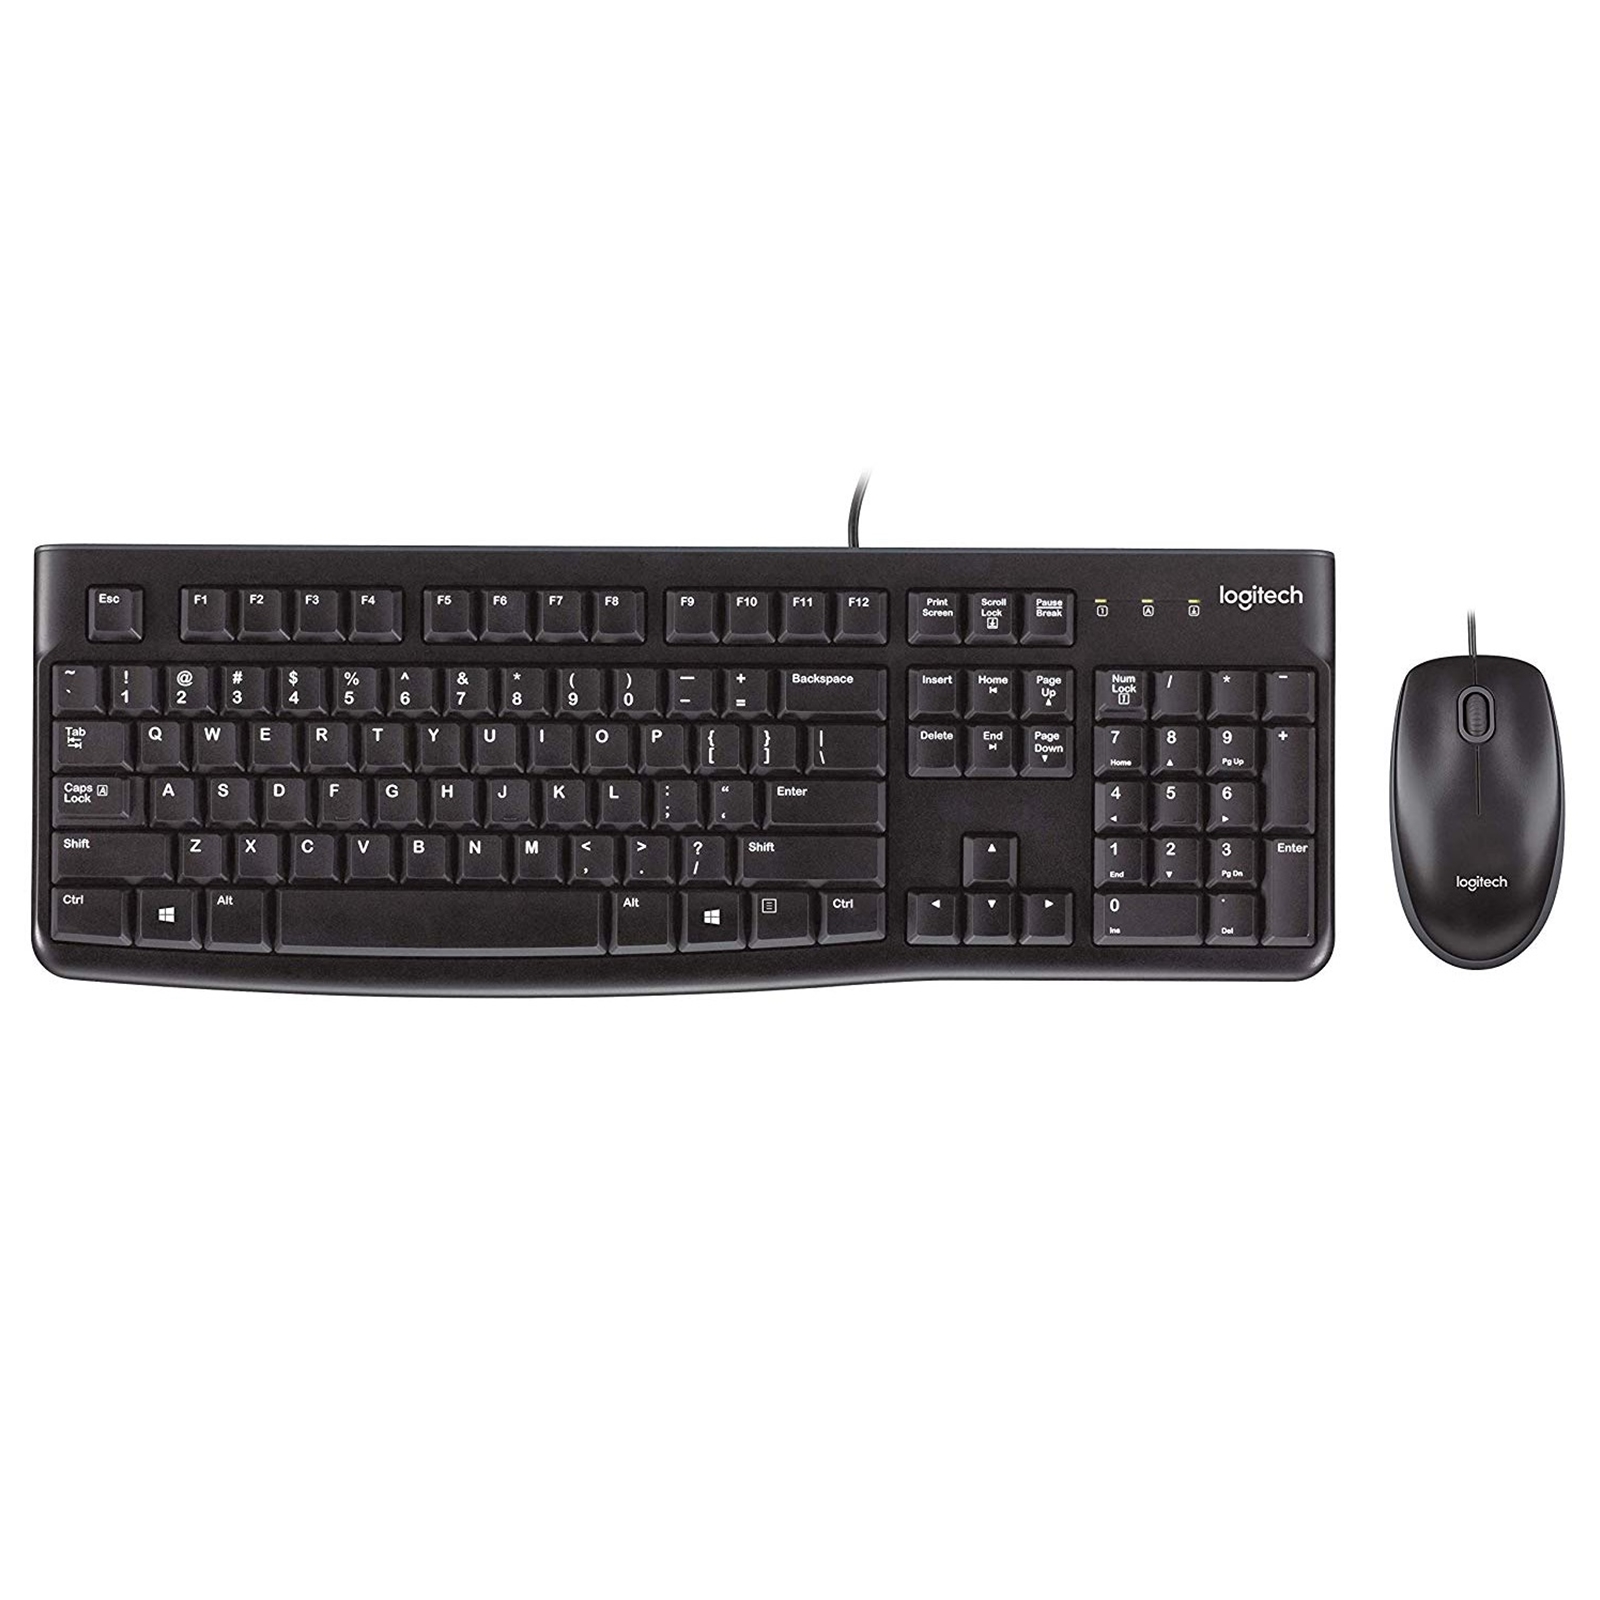 Logitech MK120 Wired Keyboard and Mouse Combo for Windows, Optical Wired Mouse, Full-Size Keyboard, USB Plug-and-Play, Compatible with PC and Laptop, QWERTY UK English Layout, Black